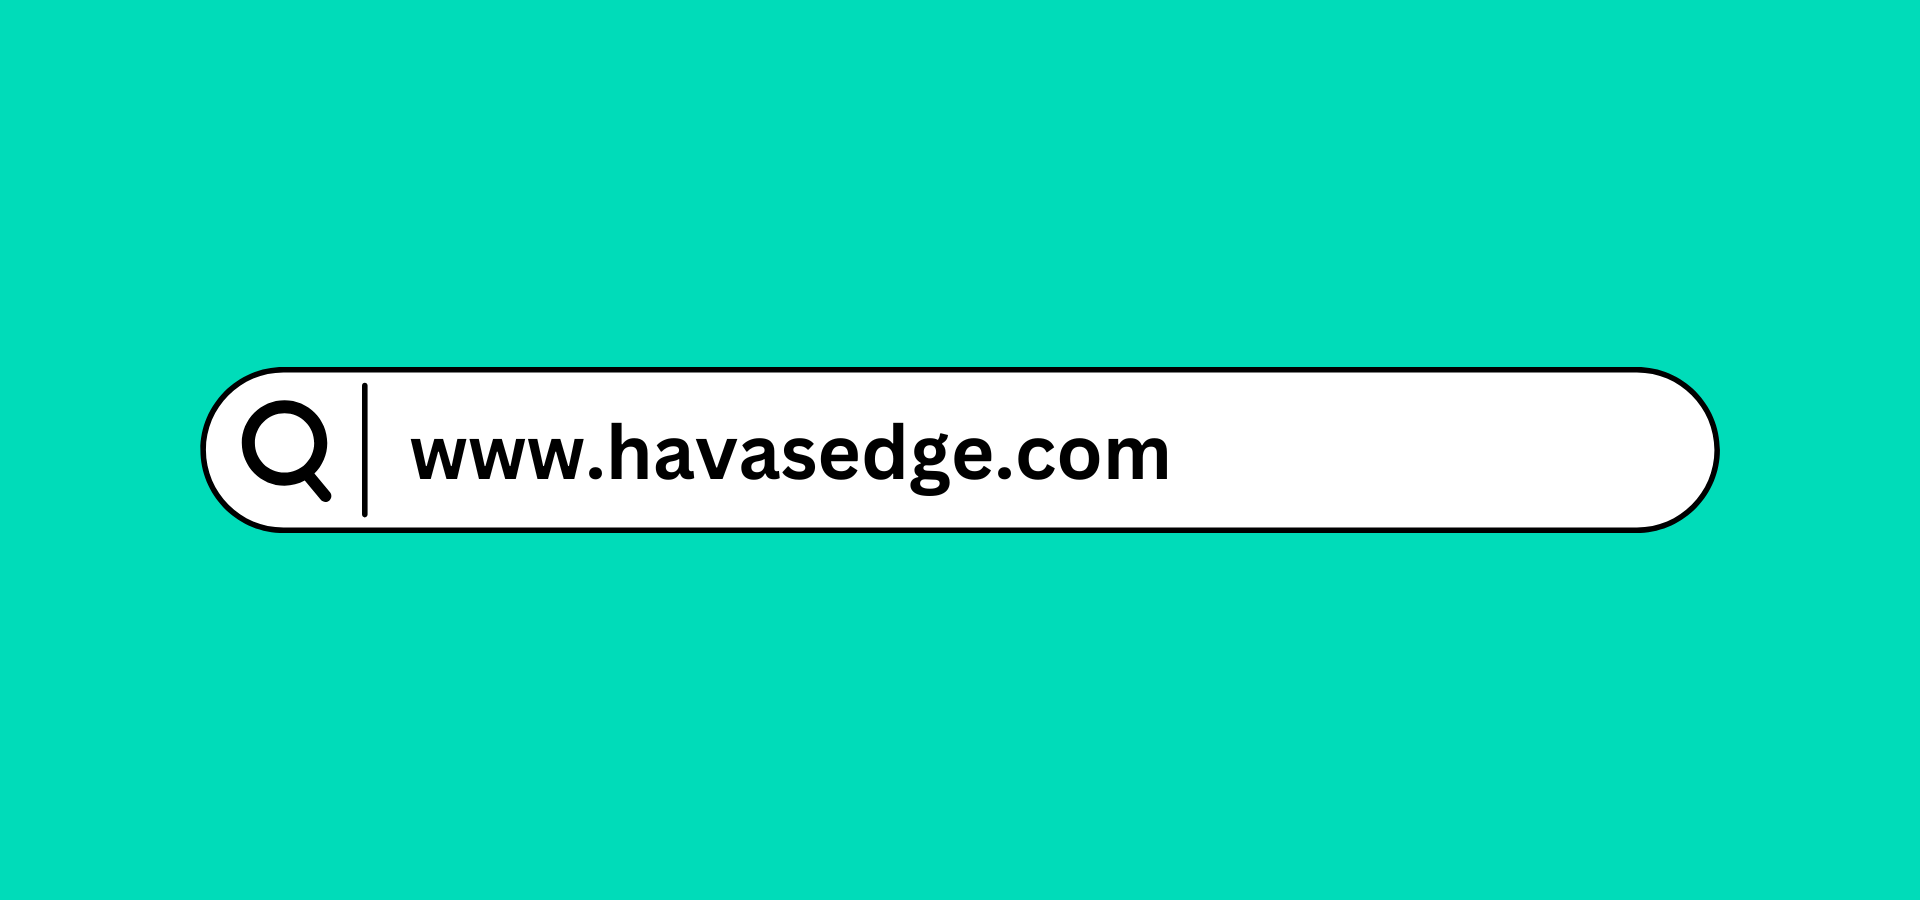 A search engine toolbar with the phrase "www.havasedge.com" typed into it